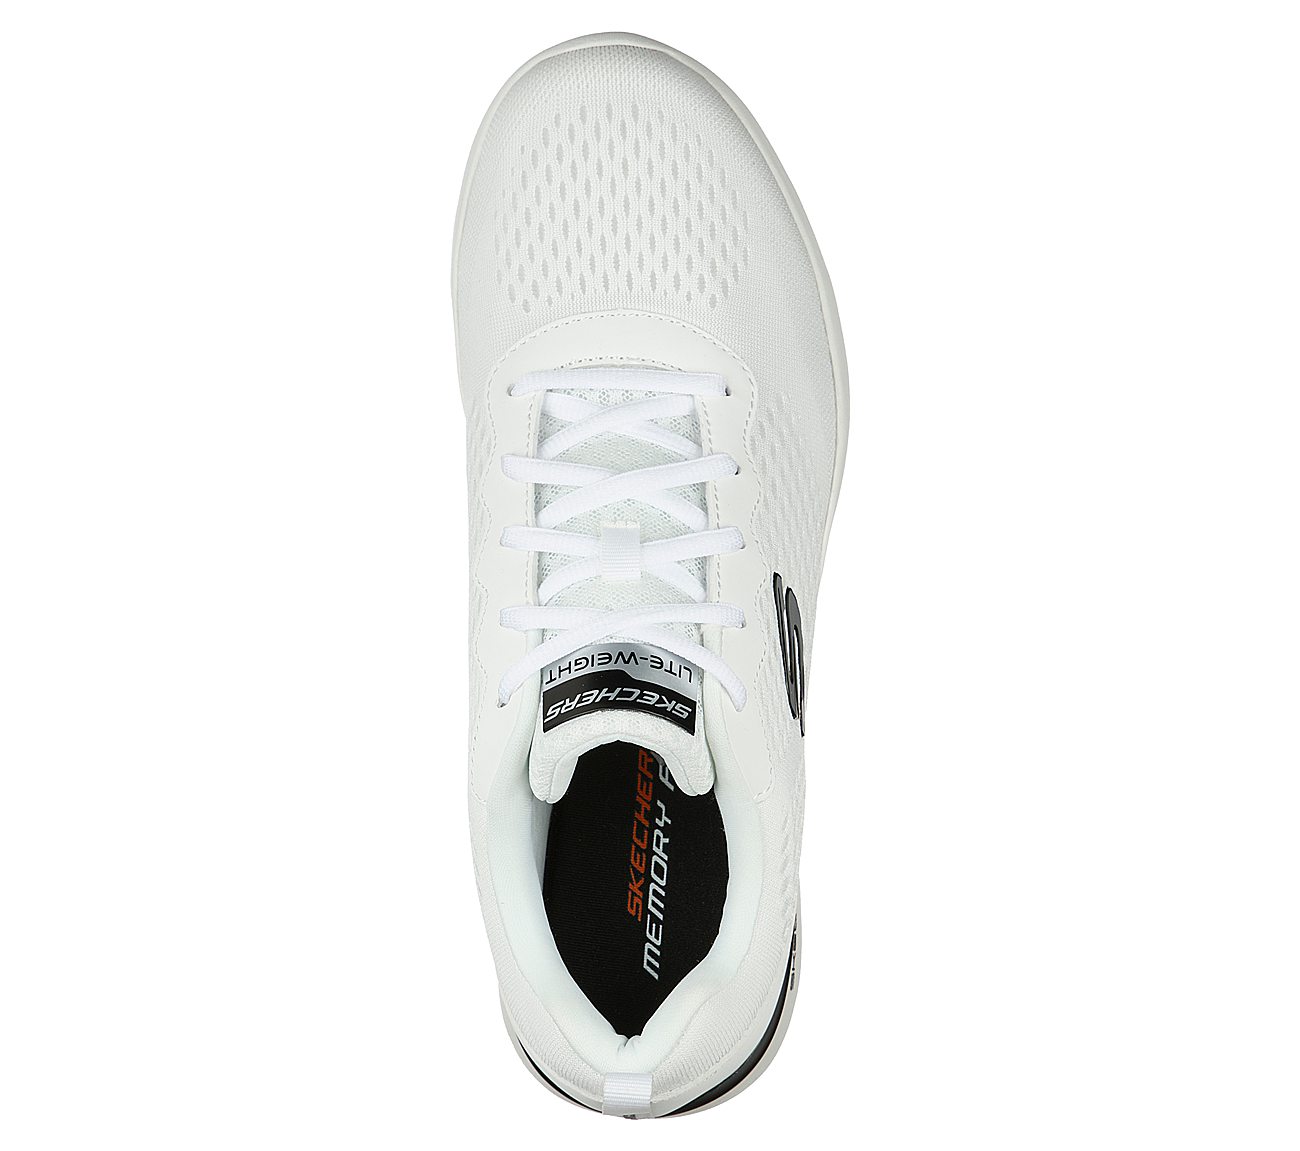 SKECH-AIR DYNAMIGHT-TUNED UP, WWWHITE Footwear Top View